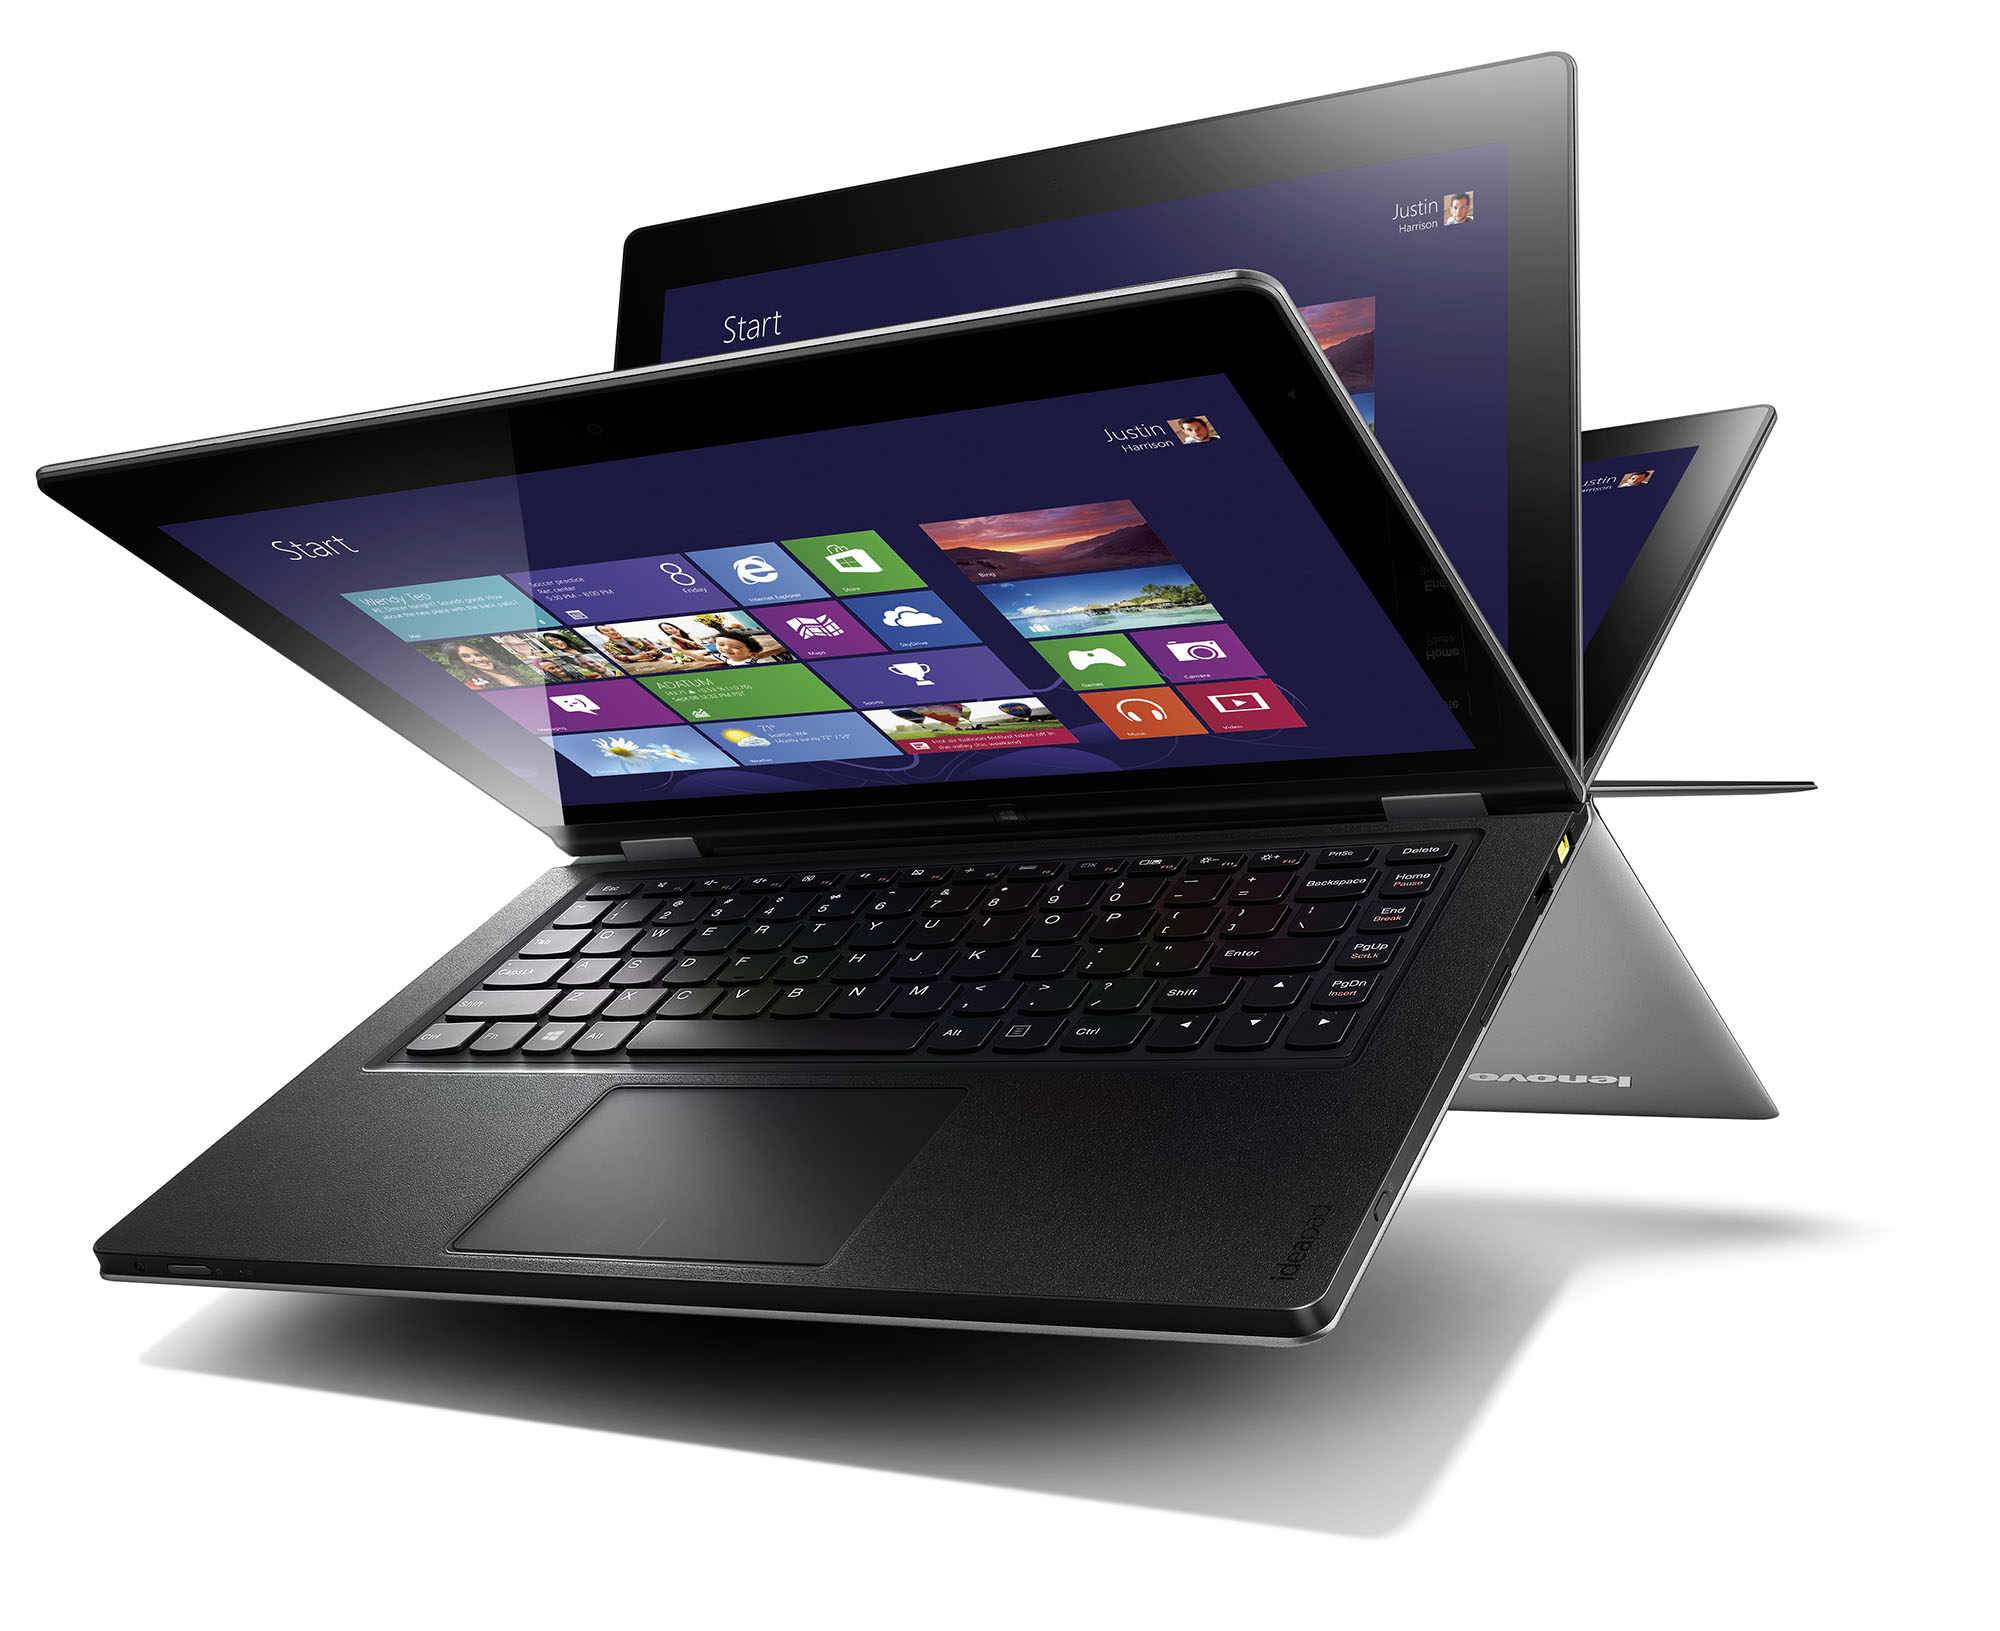 Staples Canada Launches Lenovo Line with IdeaPad Yoga and ThinkPad Twist